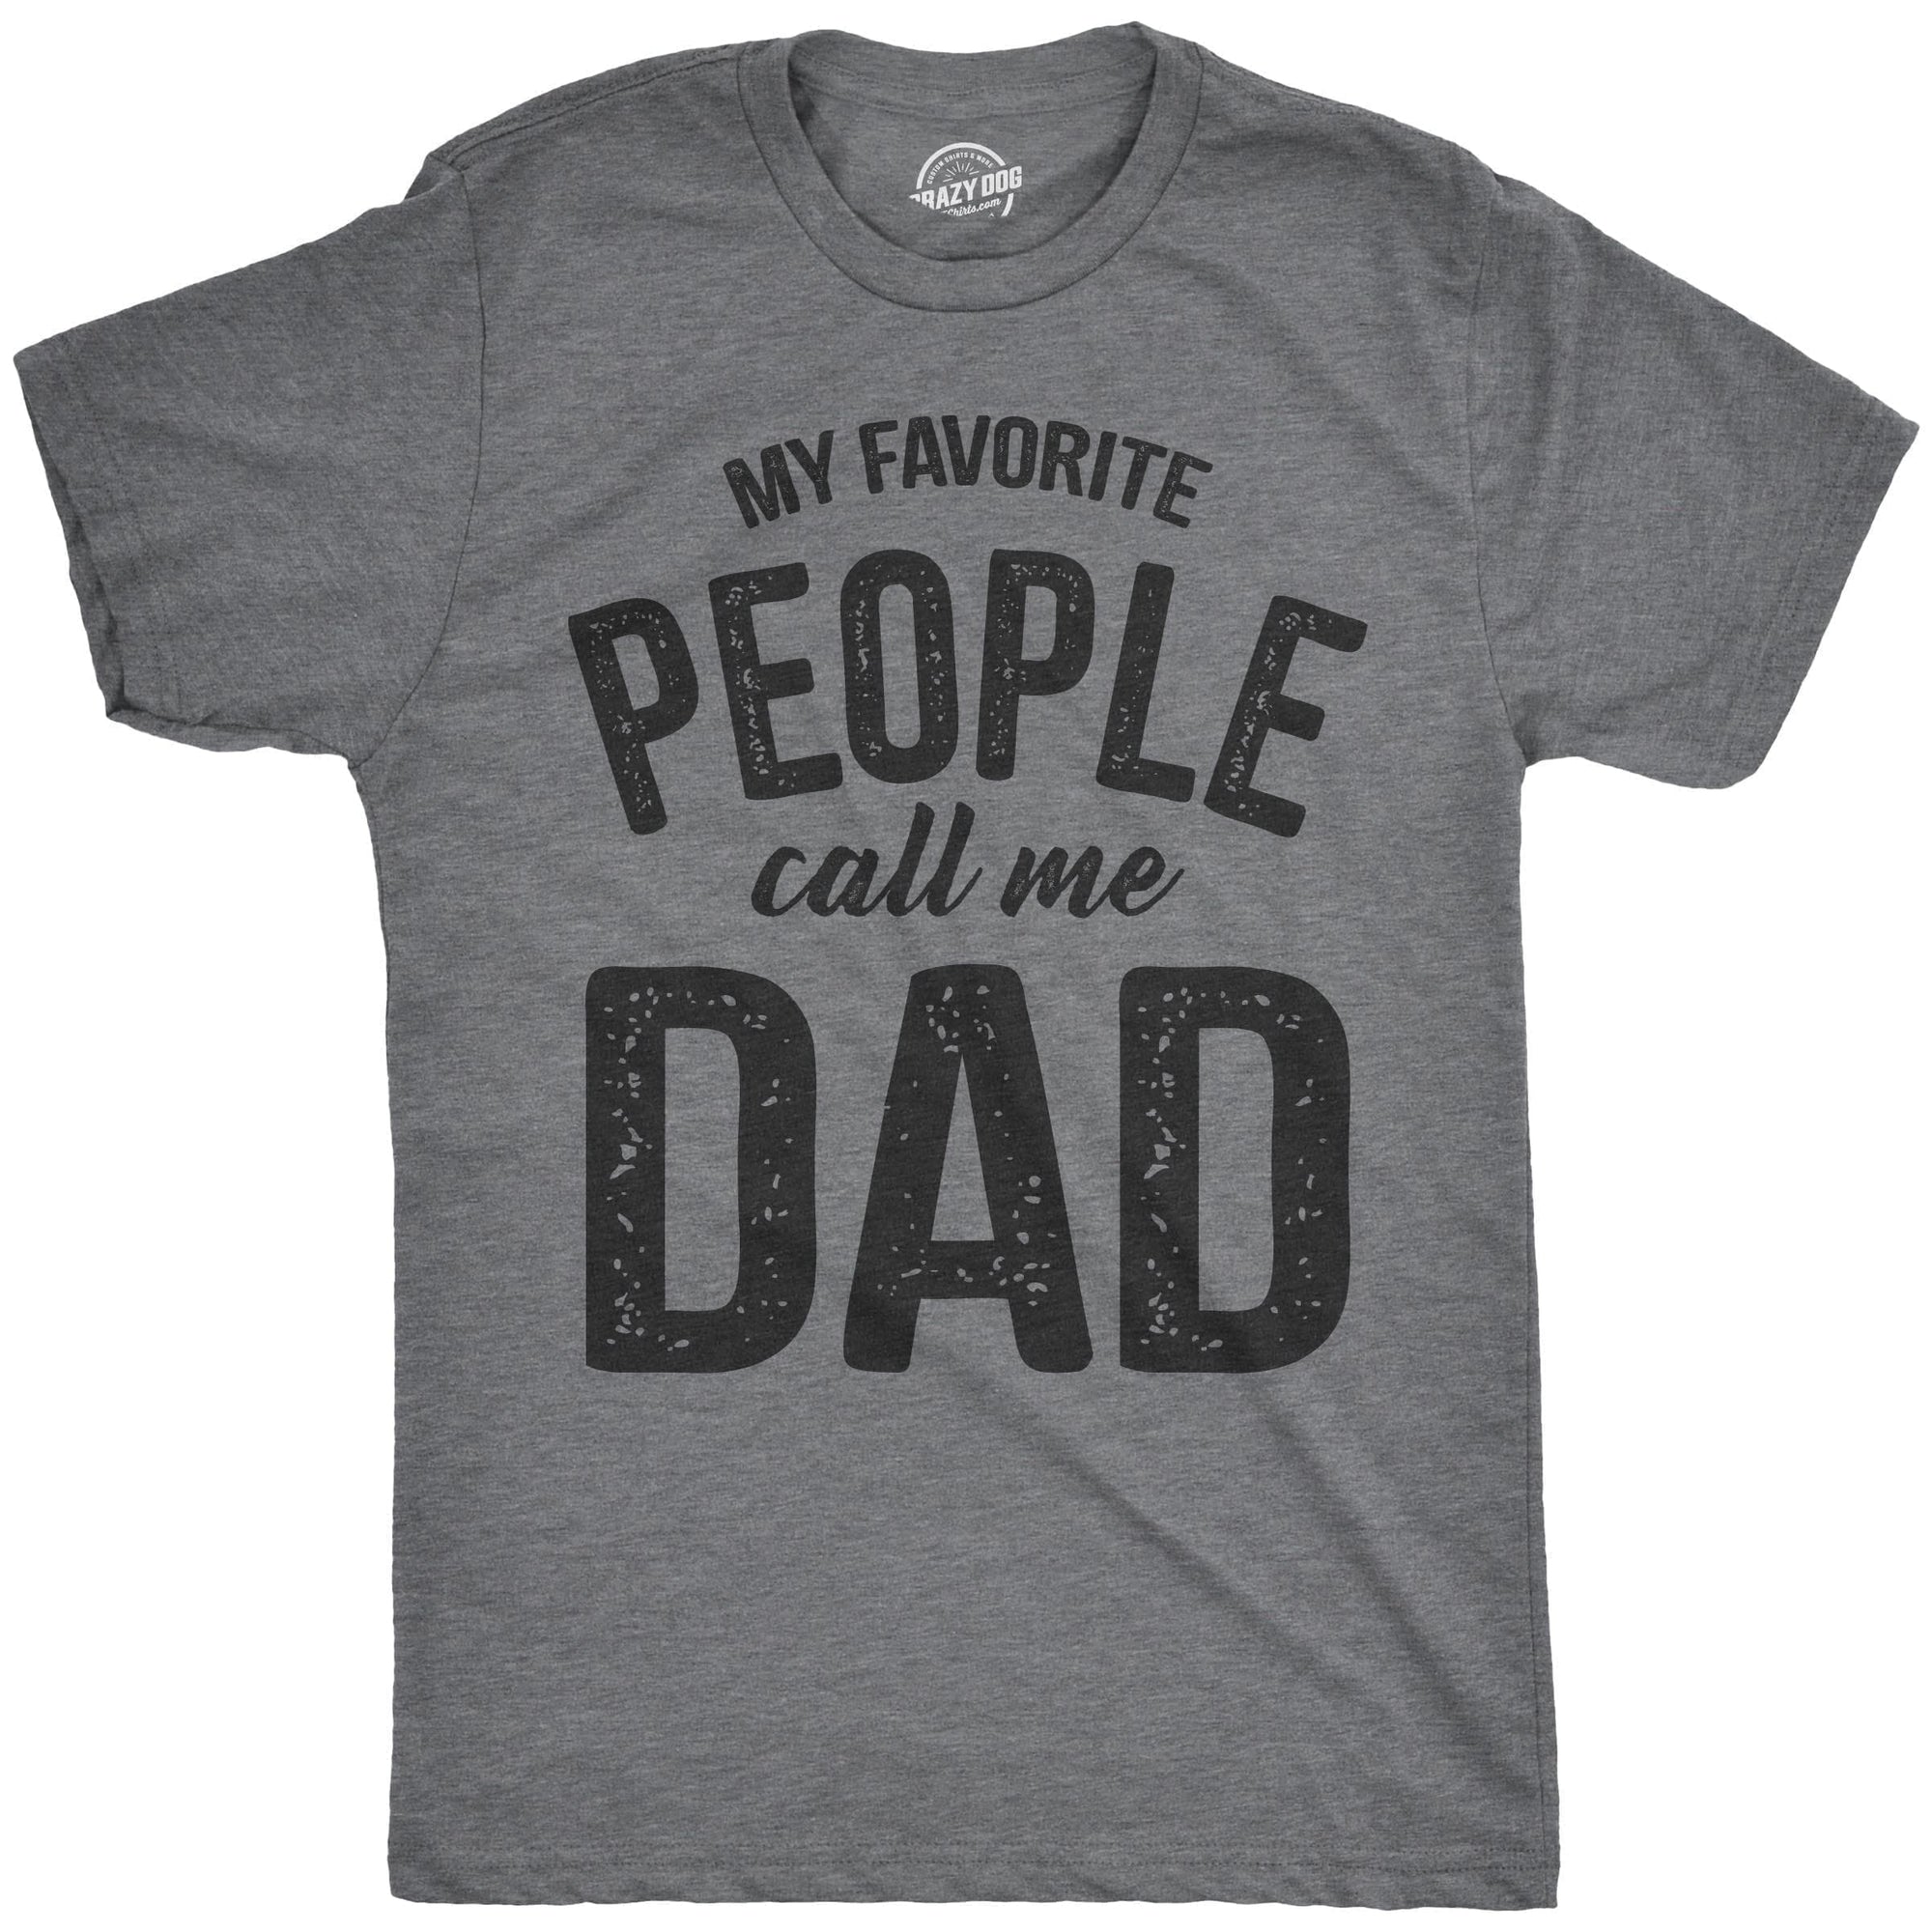 My Favorite People Call Me Dad Men's Tshirt  -  Crazy Dog T-Shirts